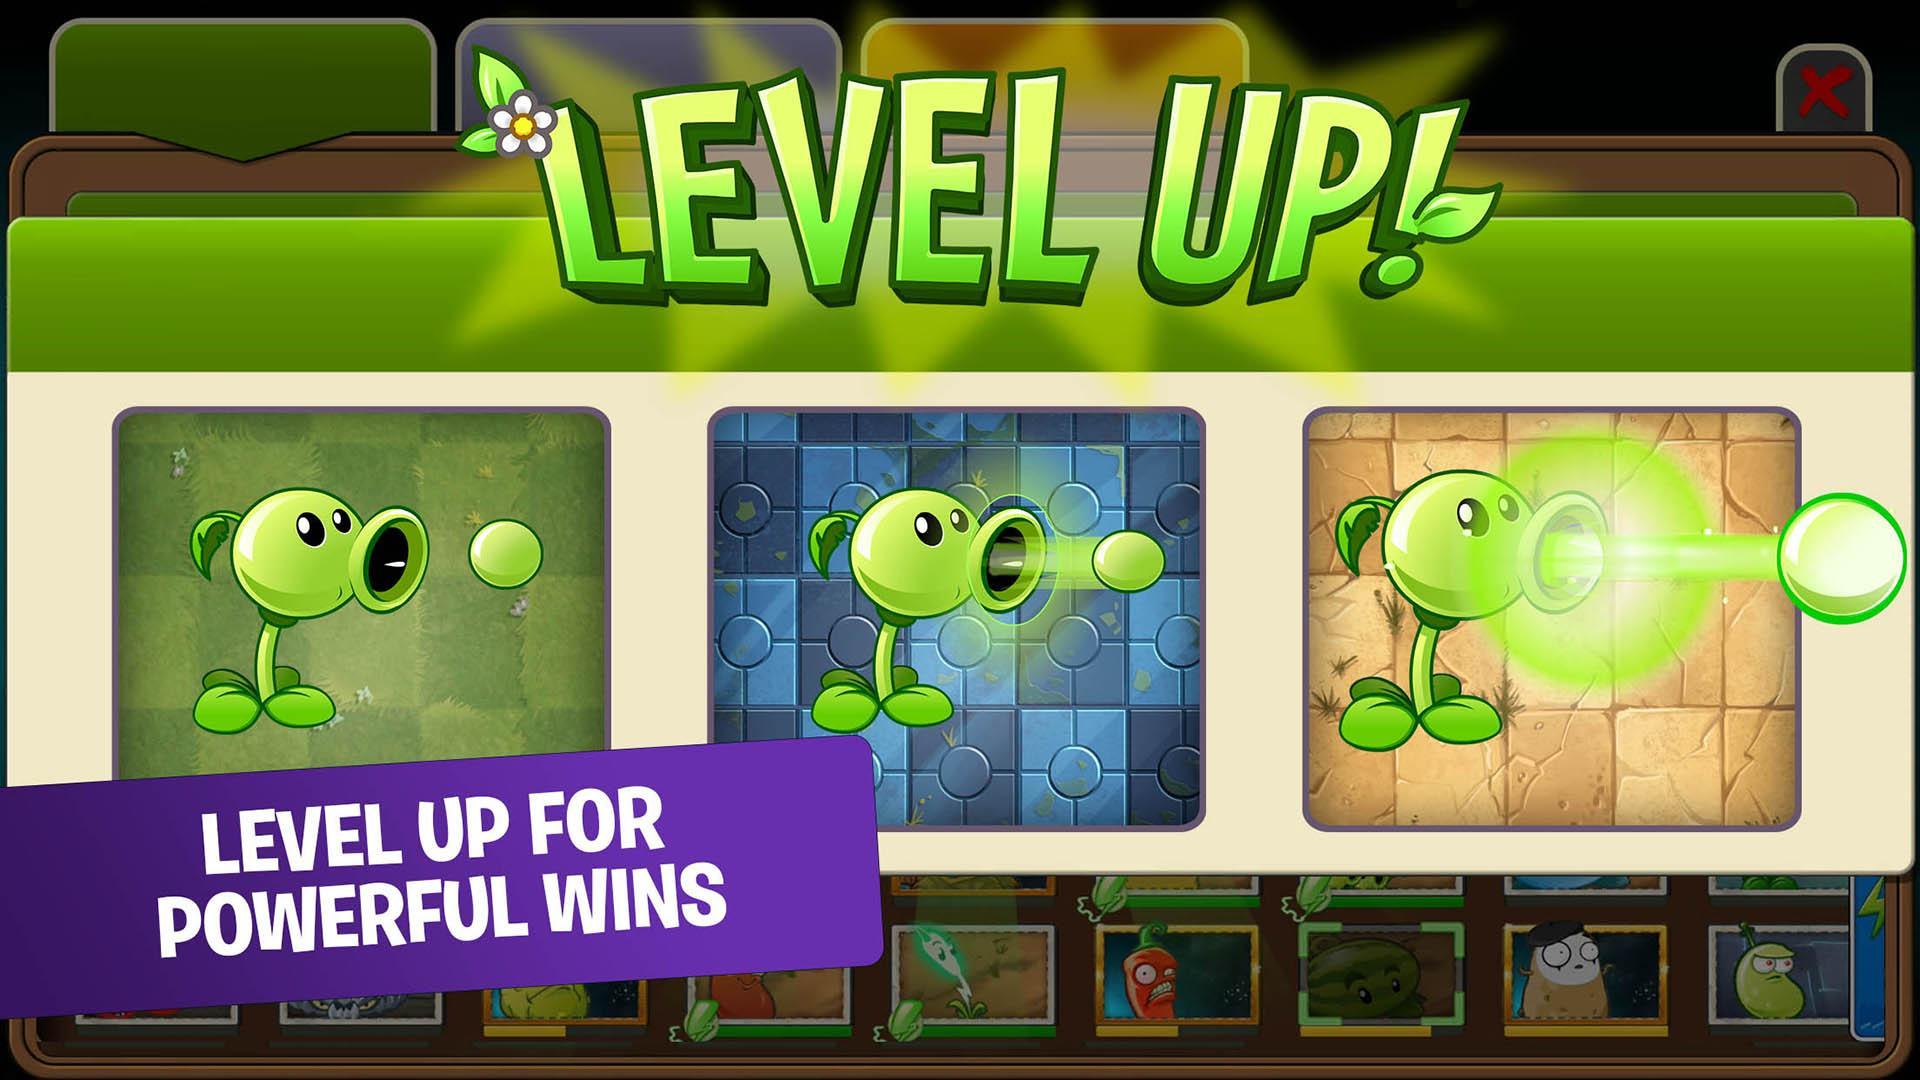 PvZ 2 Discovery - Plants & Zombies Have Similar Skills 